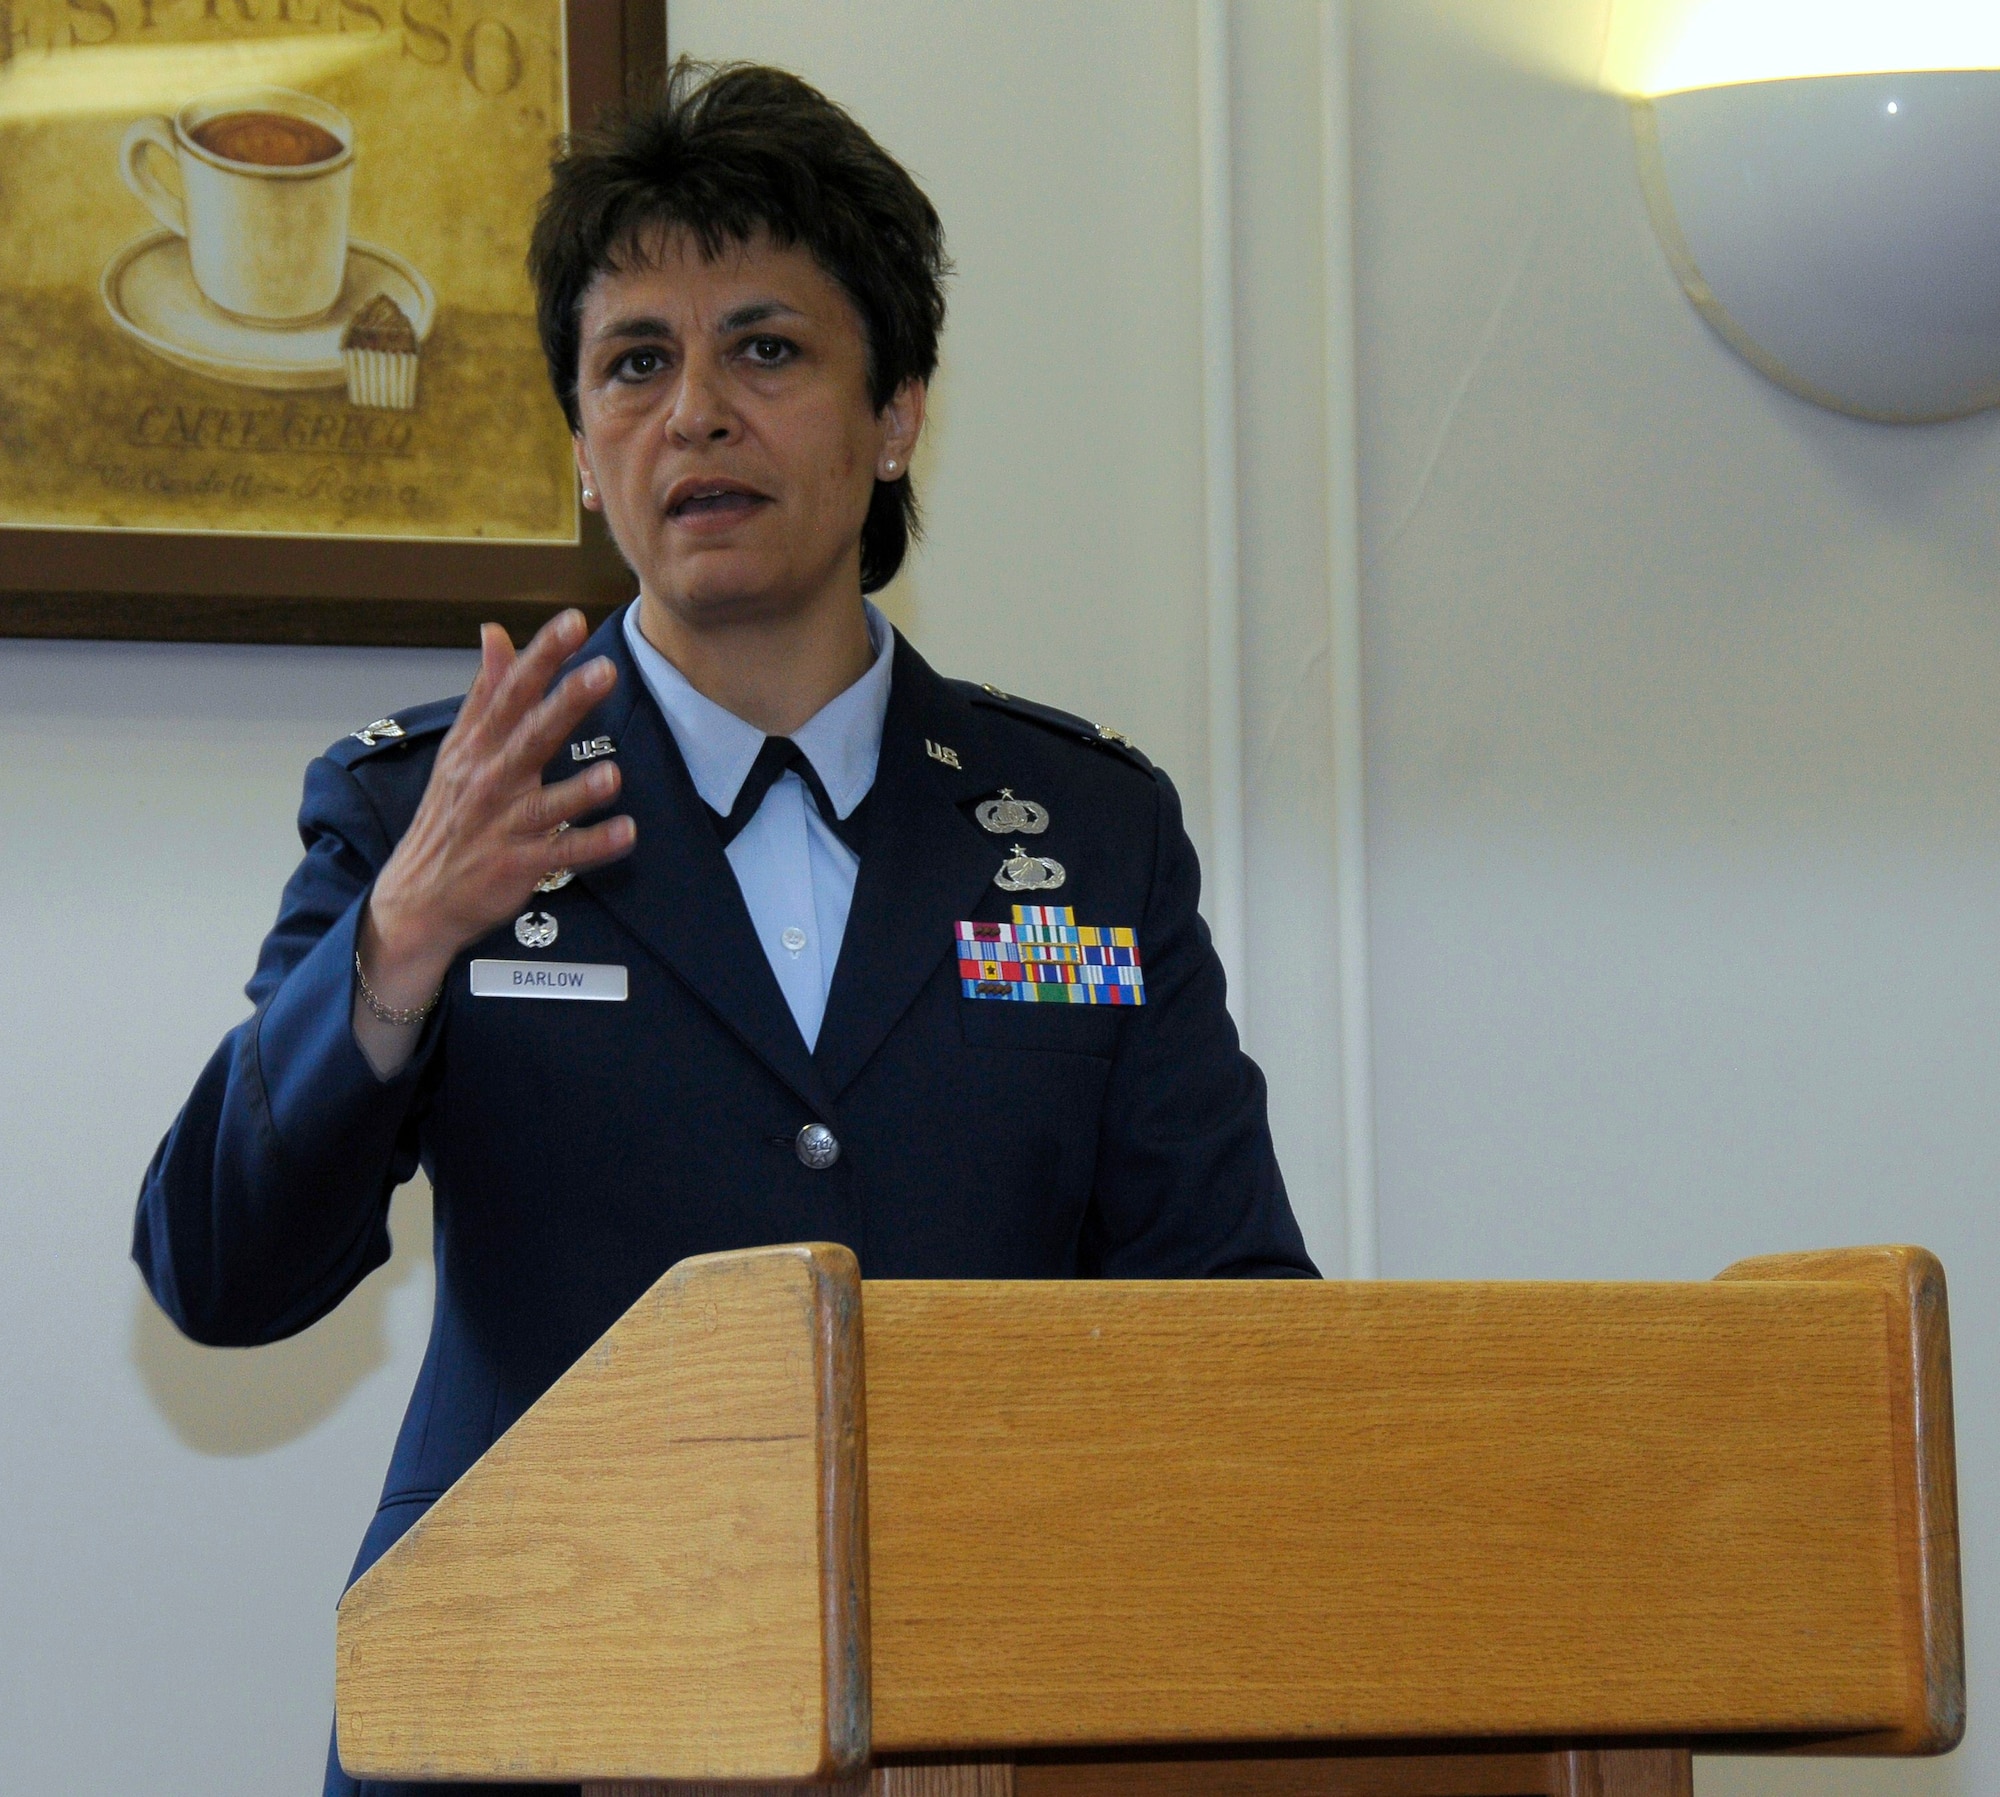 ROYAL AIR FORCE FELTWELL, England -- Guest speaker Col. Cassie Barlow, 48th Mission Support Group commander, speaks during the dedication ceremony of the newly renamed Ward Community Activity Center on May 14, 2011. The building was named in honor of Sgt. James A. Ward, the first New Zealander awarded the Victoria Cross; the British equivalent of the Medal of Honor. Sergeant Ward was stationed at RAF Feltwell with the Royal New Zealand Air Force No. 75 Squadron during World War II. He was awarded the medal for his heroic actions on July 7, 1941, when his Wellington bomber caught fire from an enemy attack. (U.S. Air Force photo/Staff Sgt. Connor Estes)